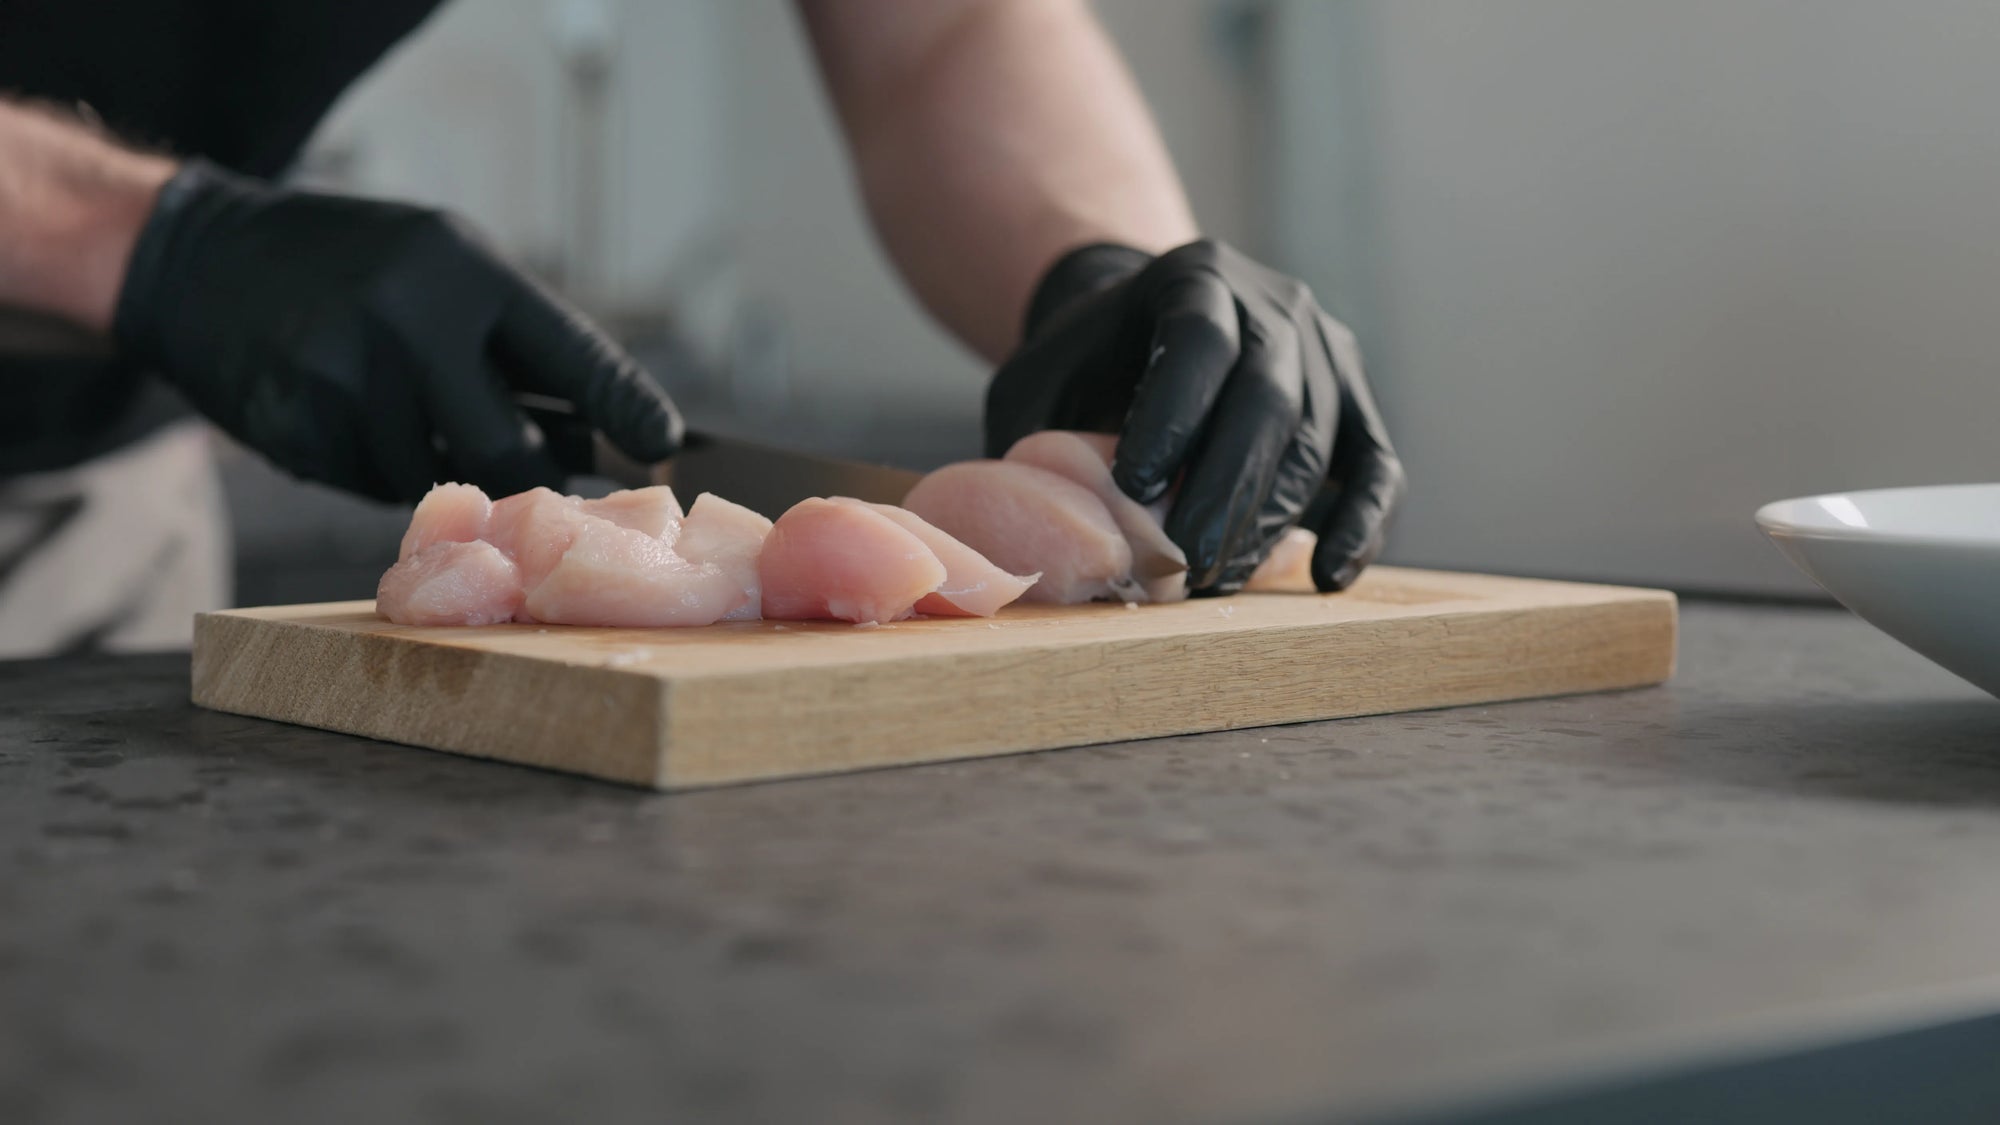 Person wearing black gloves cutting raw chicken breasts on a wooden cutting board.